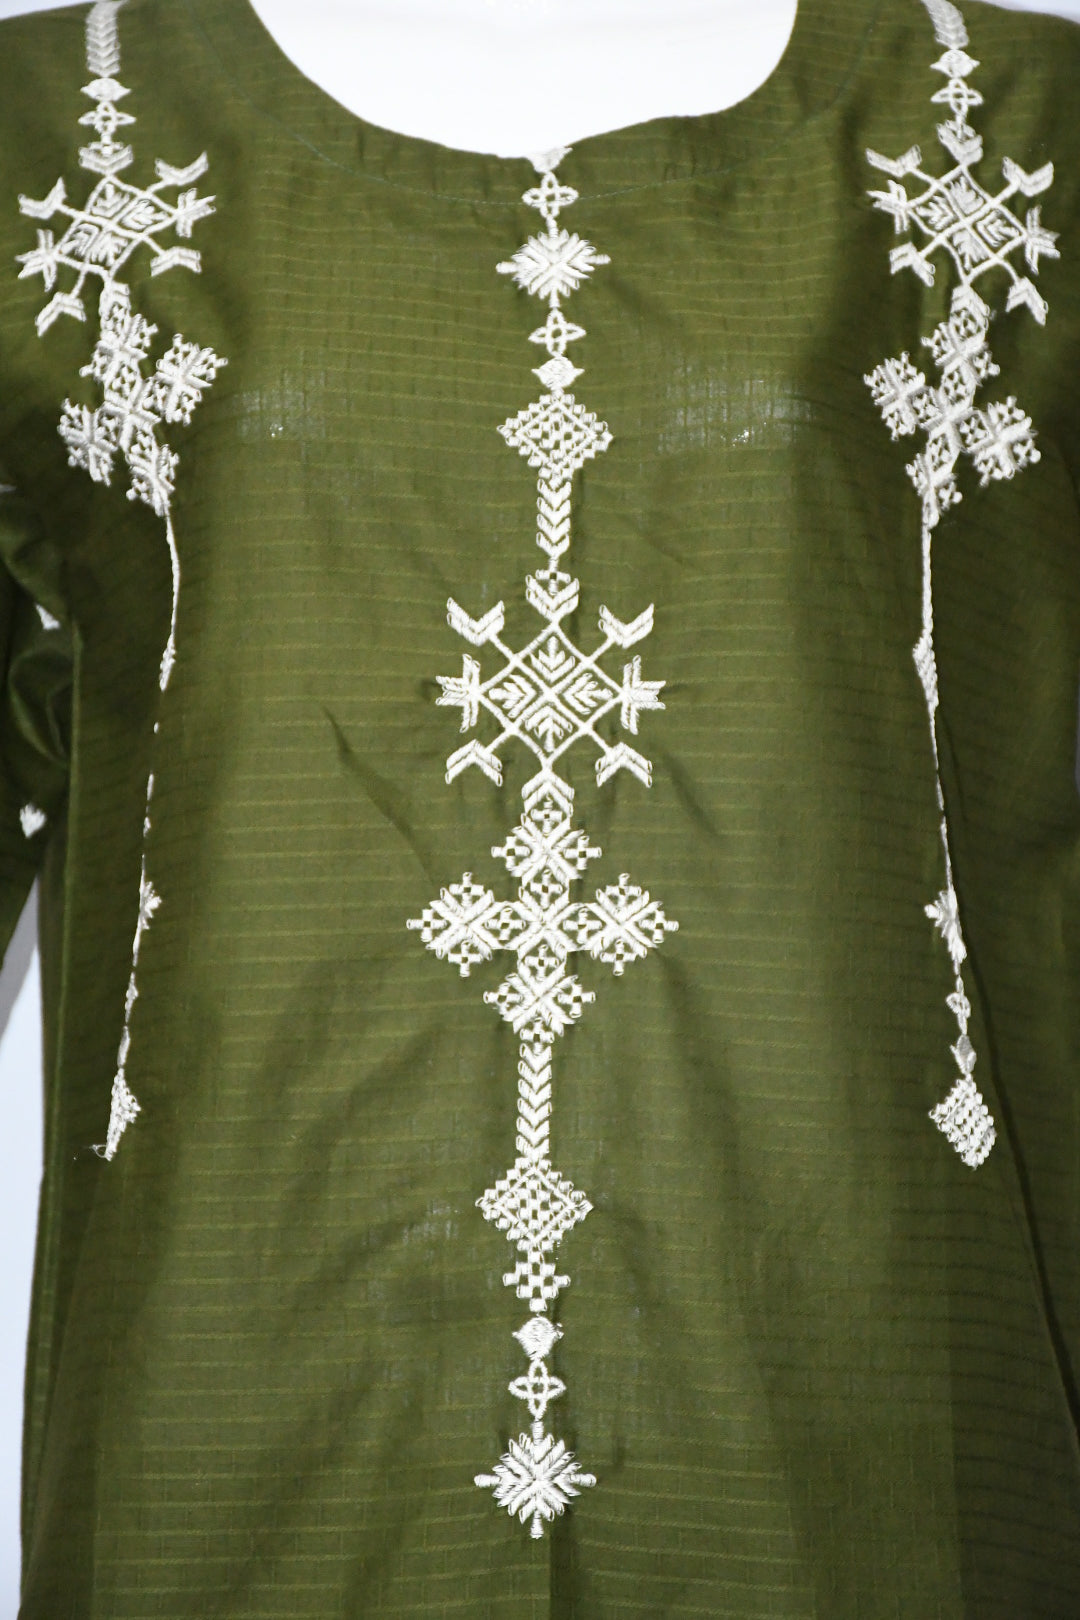 Moss Green Embroidered Shirt and Trouser